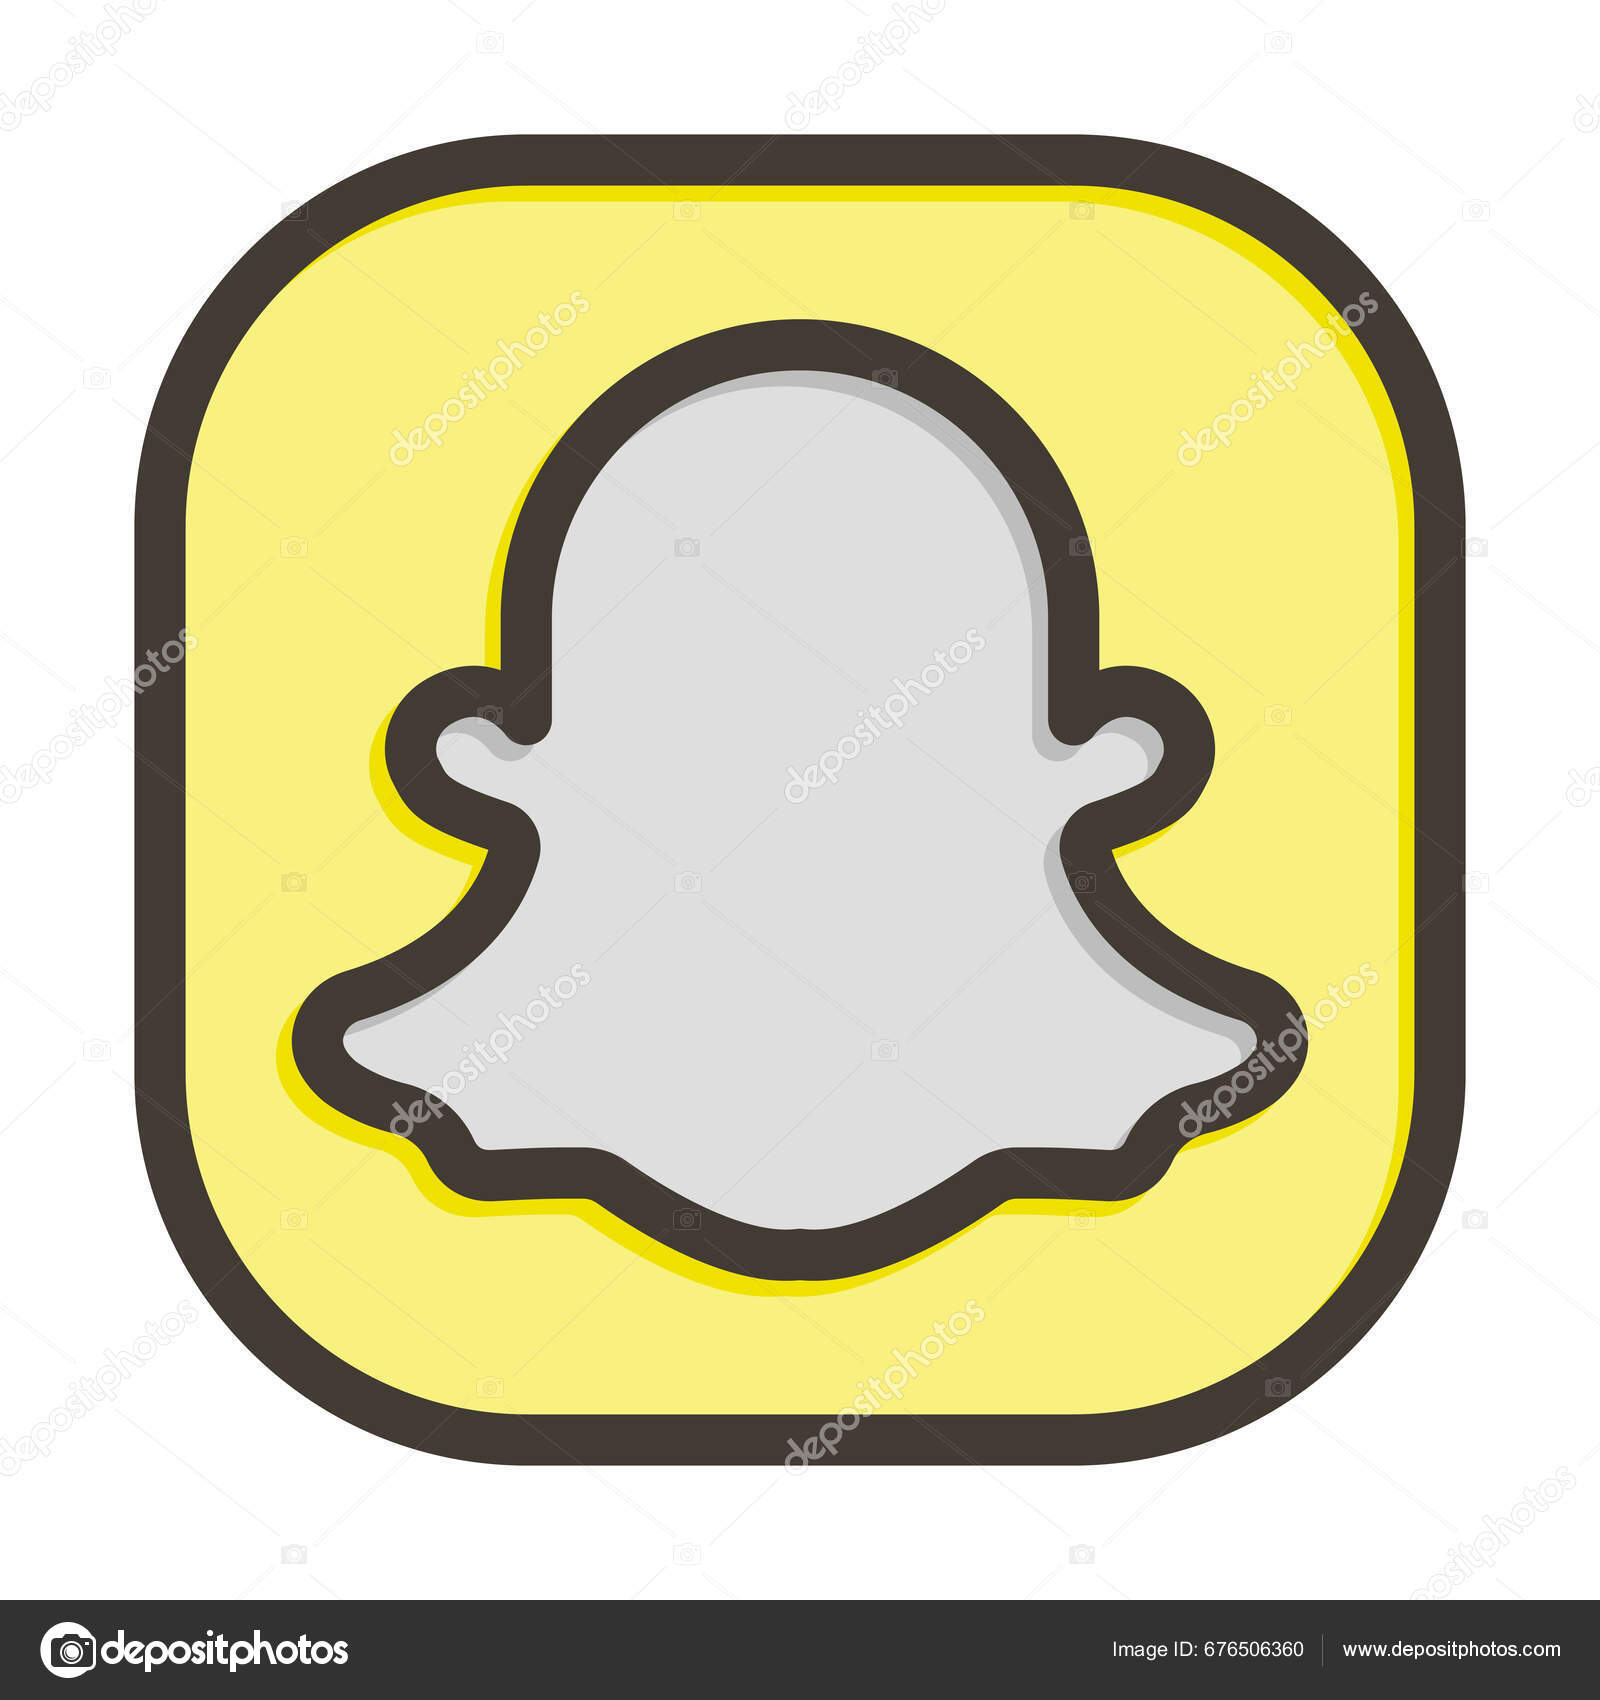 Free Snapchat Logo Icon - Download in Glyph Style